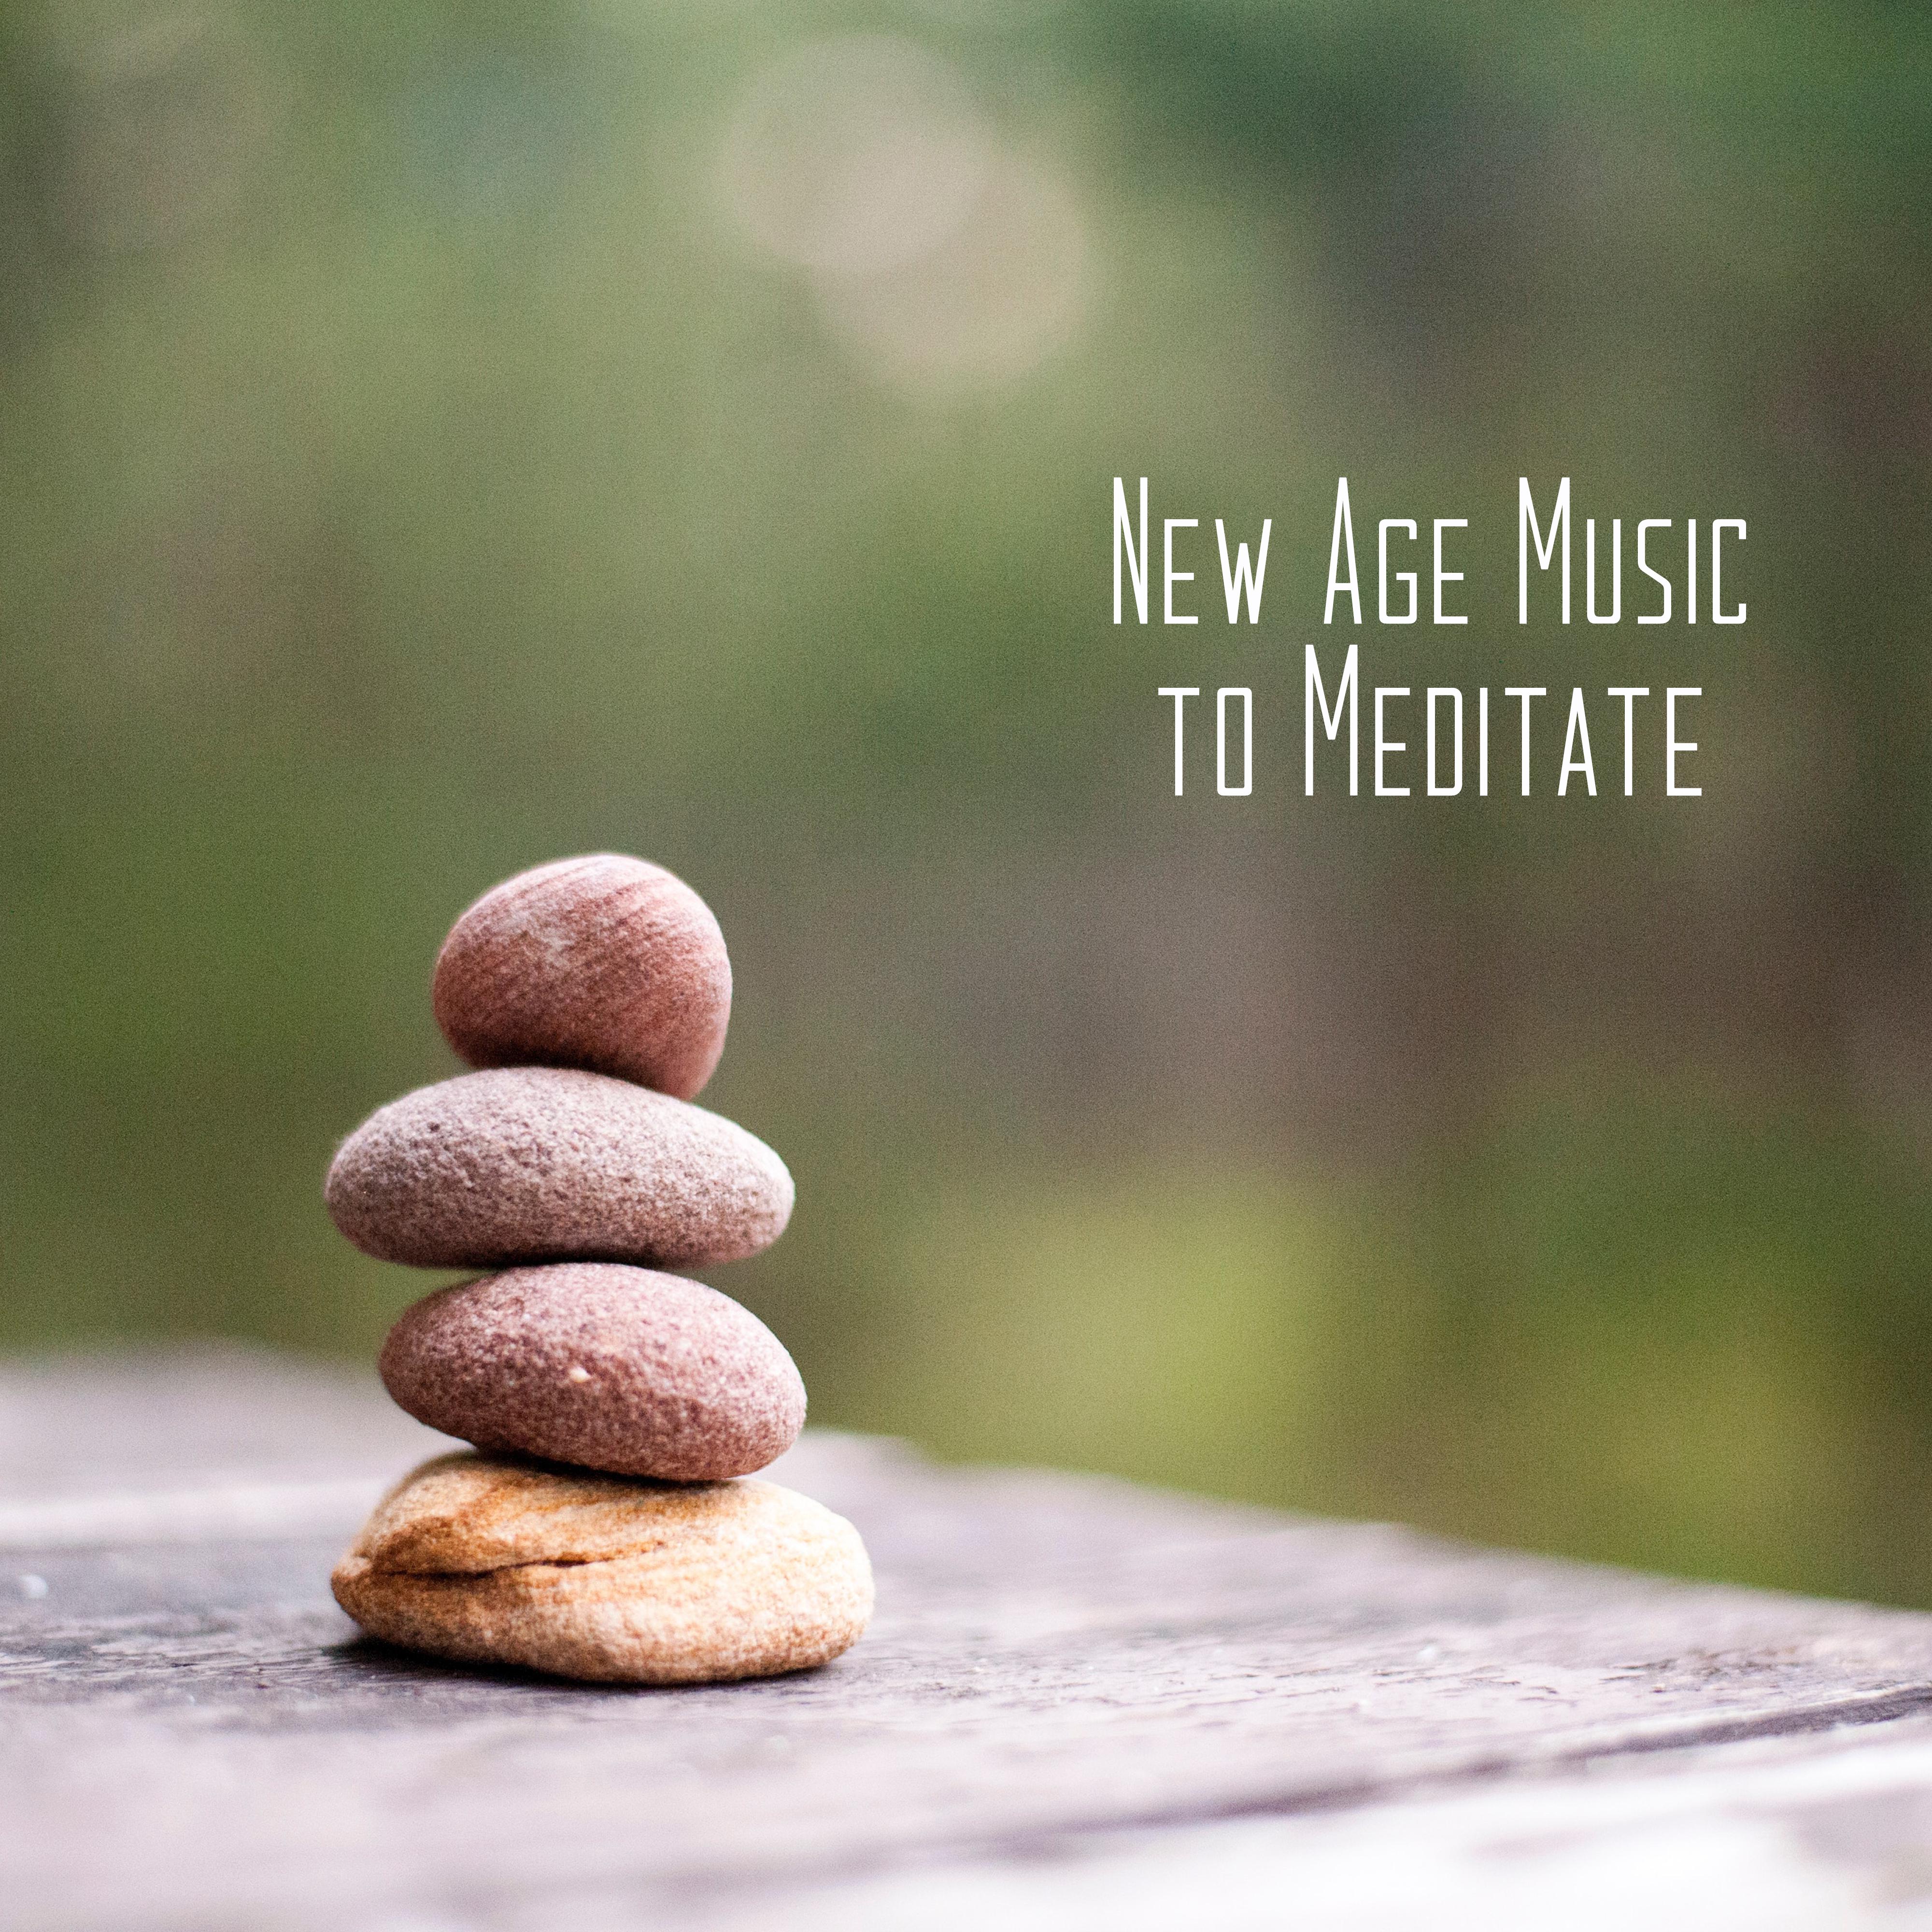 New Age Music to Meditate